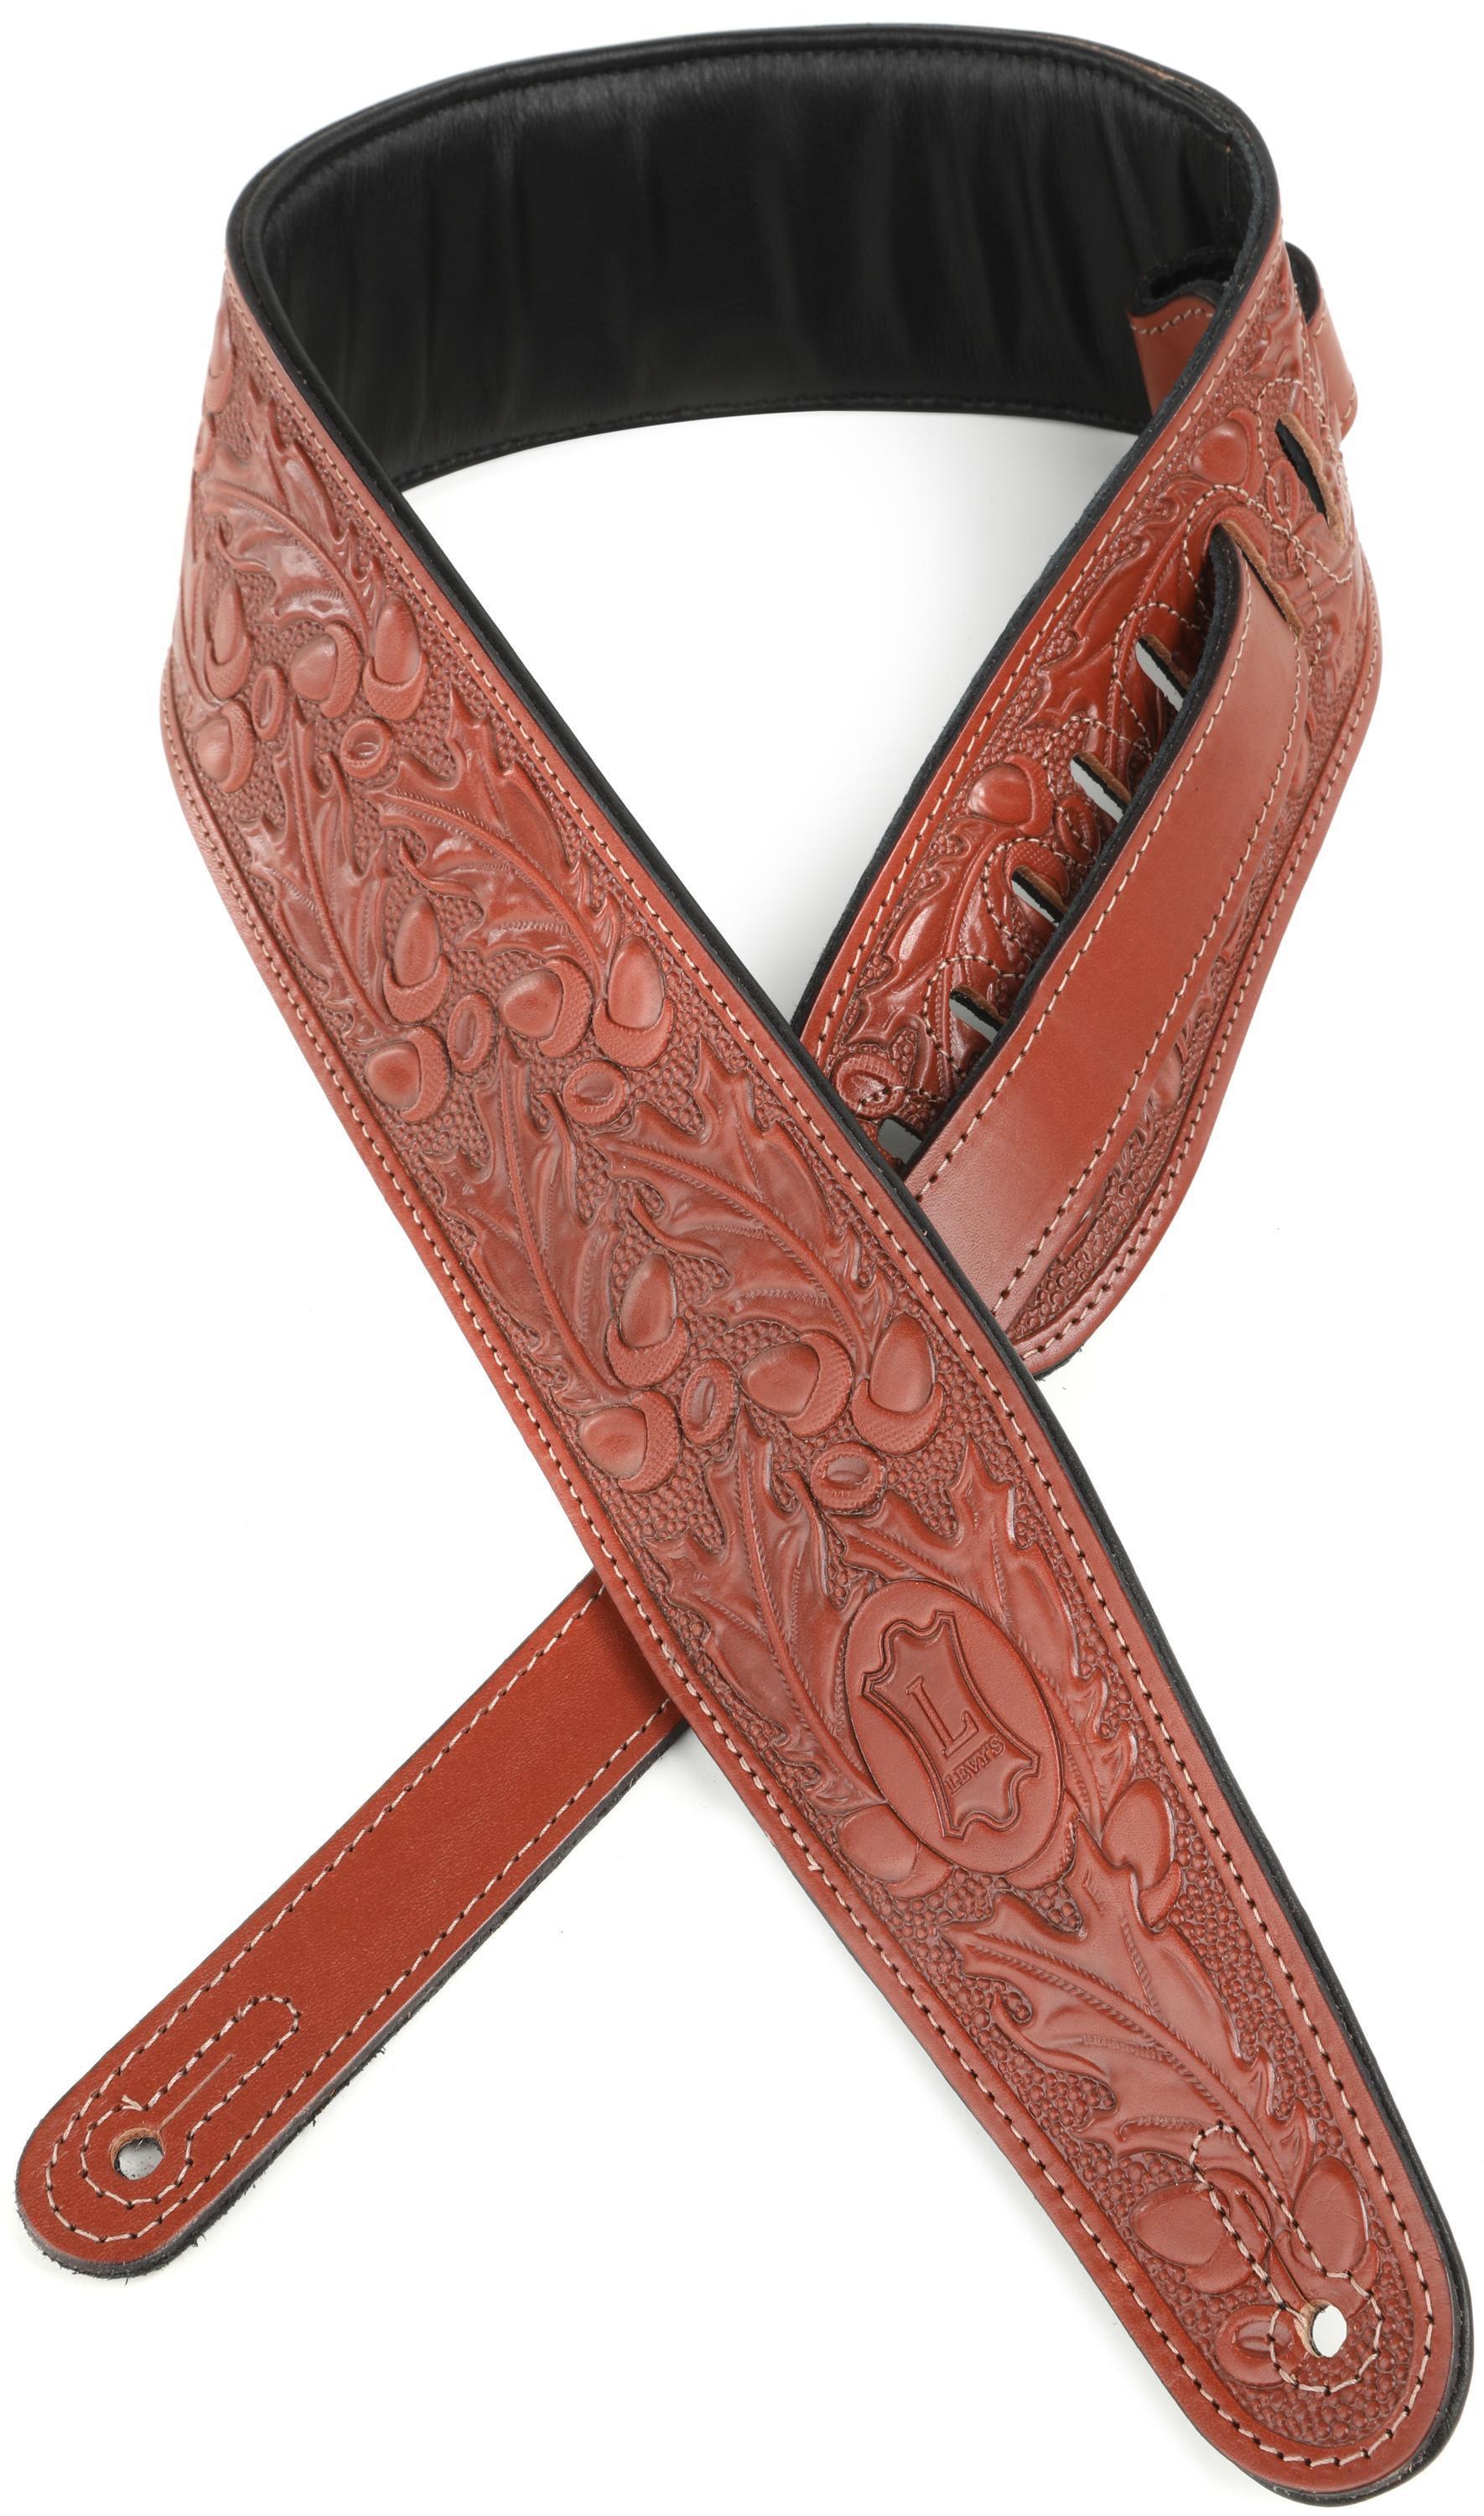 Levy's PM44T01 Leather Guitar Strap - Walnut